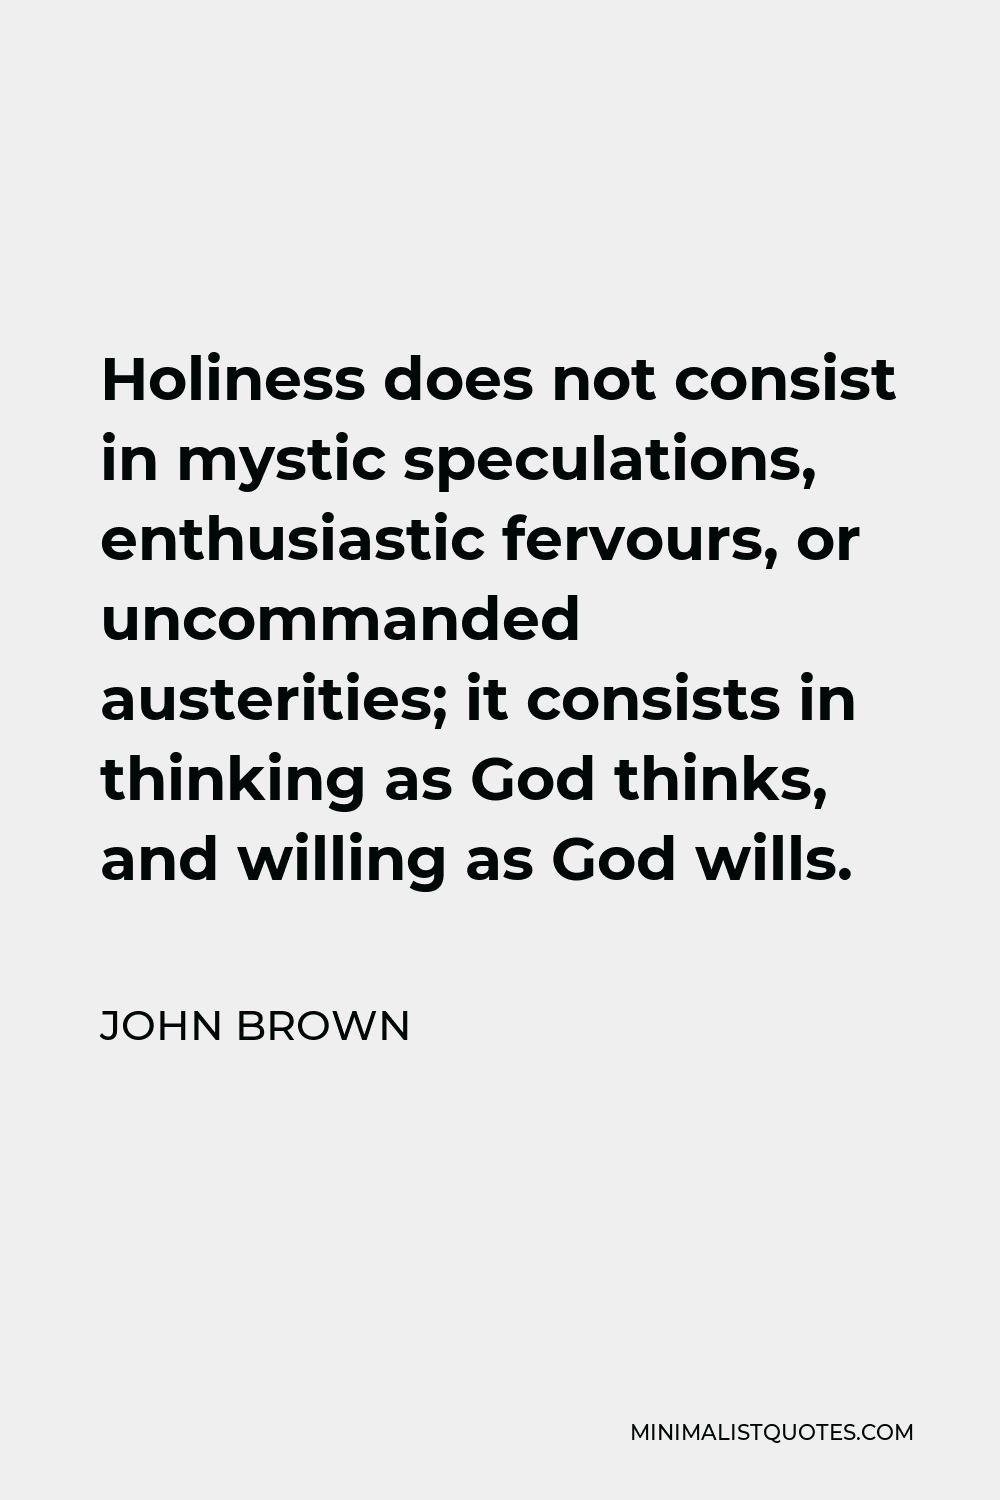 John Brown Quote - Holiness does not consist in mystic speculations, enthusiastic fervours, or uncommanded austerities; it consists in thinking as God thinks, and willing as God wills.